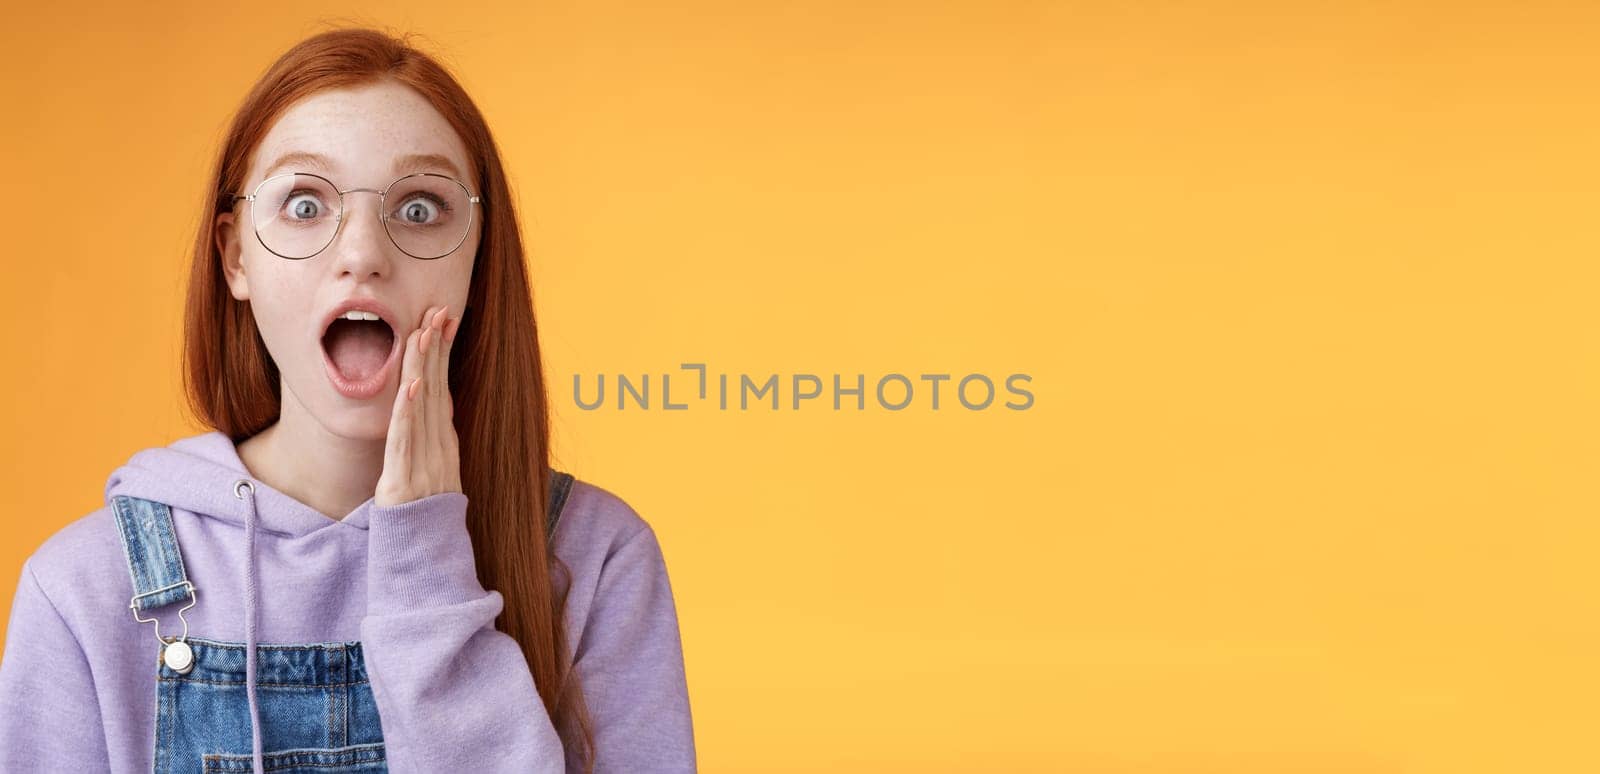 Omg no way. Attractive shocked wondered redhead amused hipster woman modern teenager drop jaw gasping wide eyes surprised standing amazed reacting shocked camera touch cheek excited.